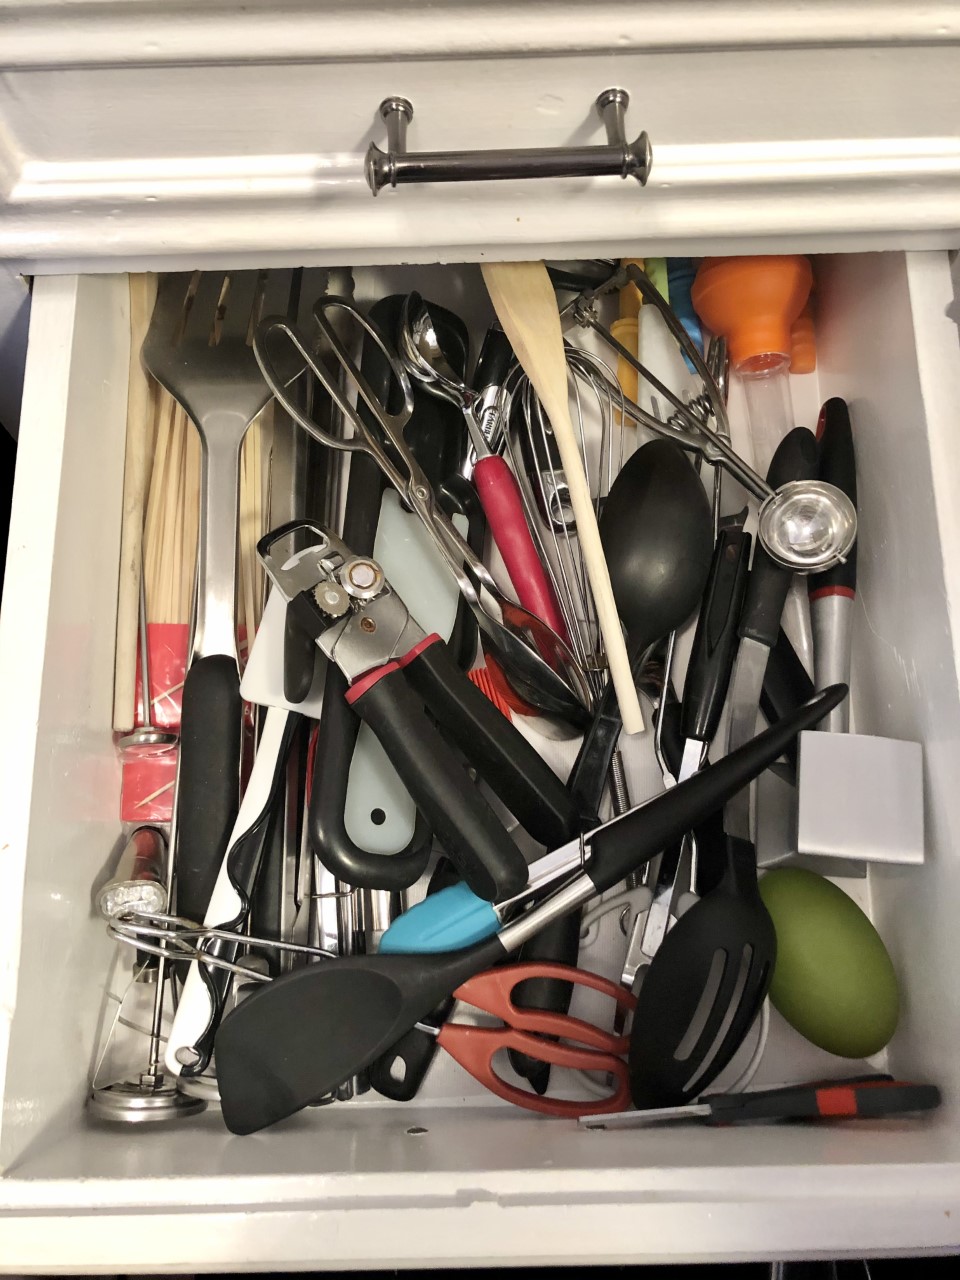 League City home organizing services - utensils before